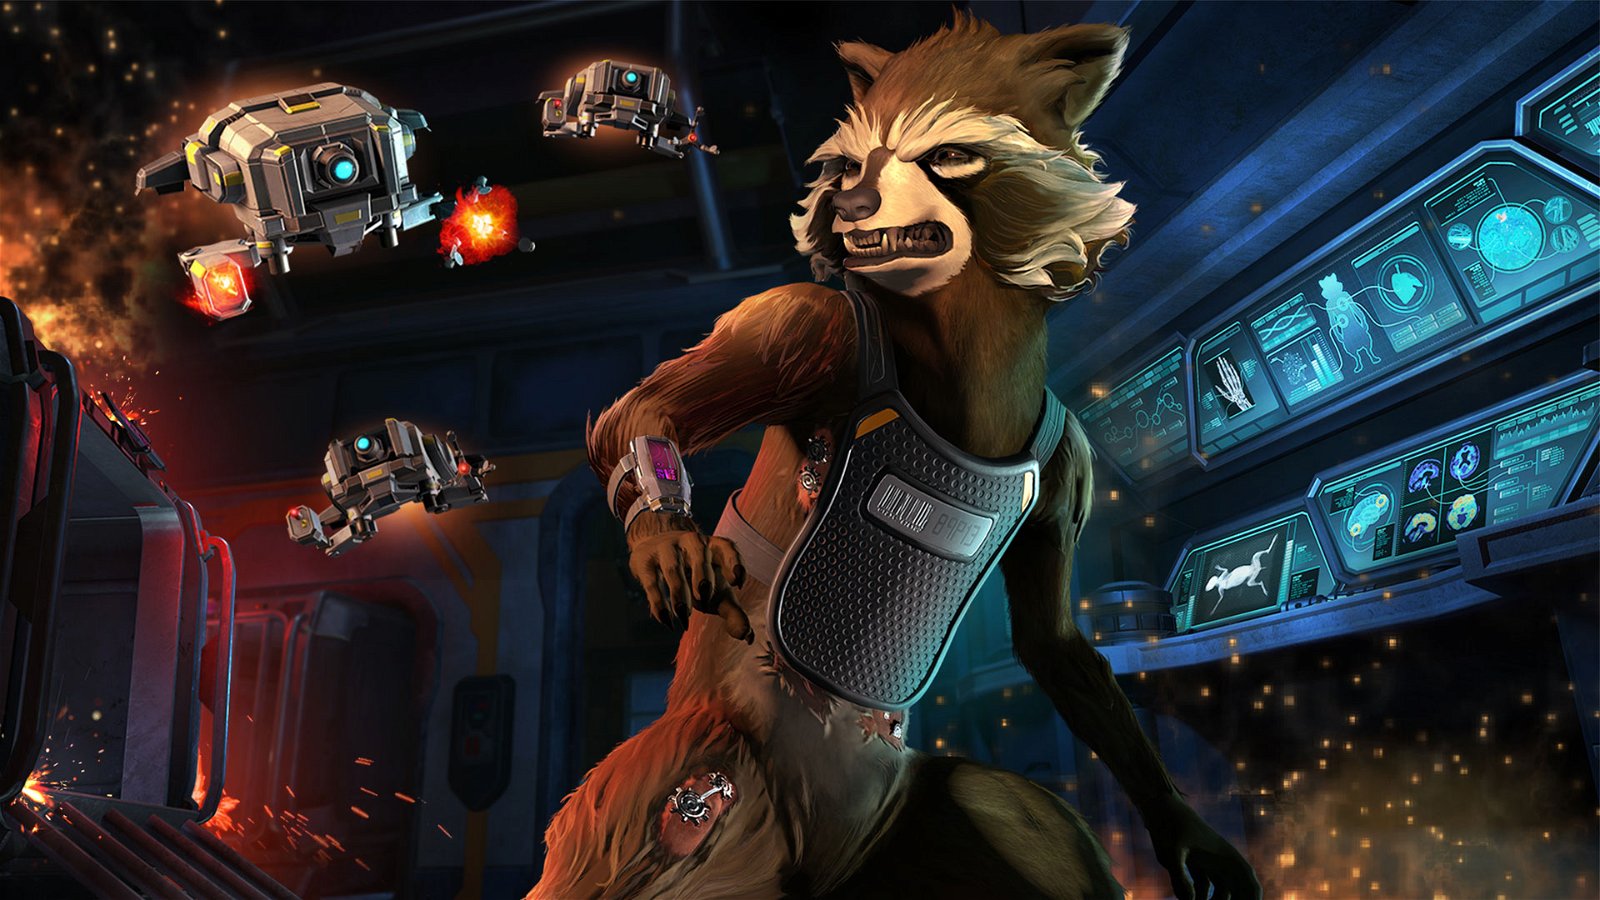 Guardians of the Galaxy: A Telltale Series Episode 2: “Under Pressure” Review 1